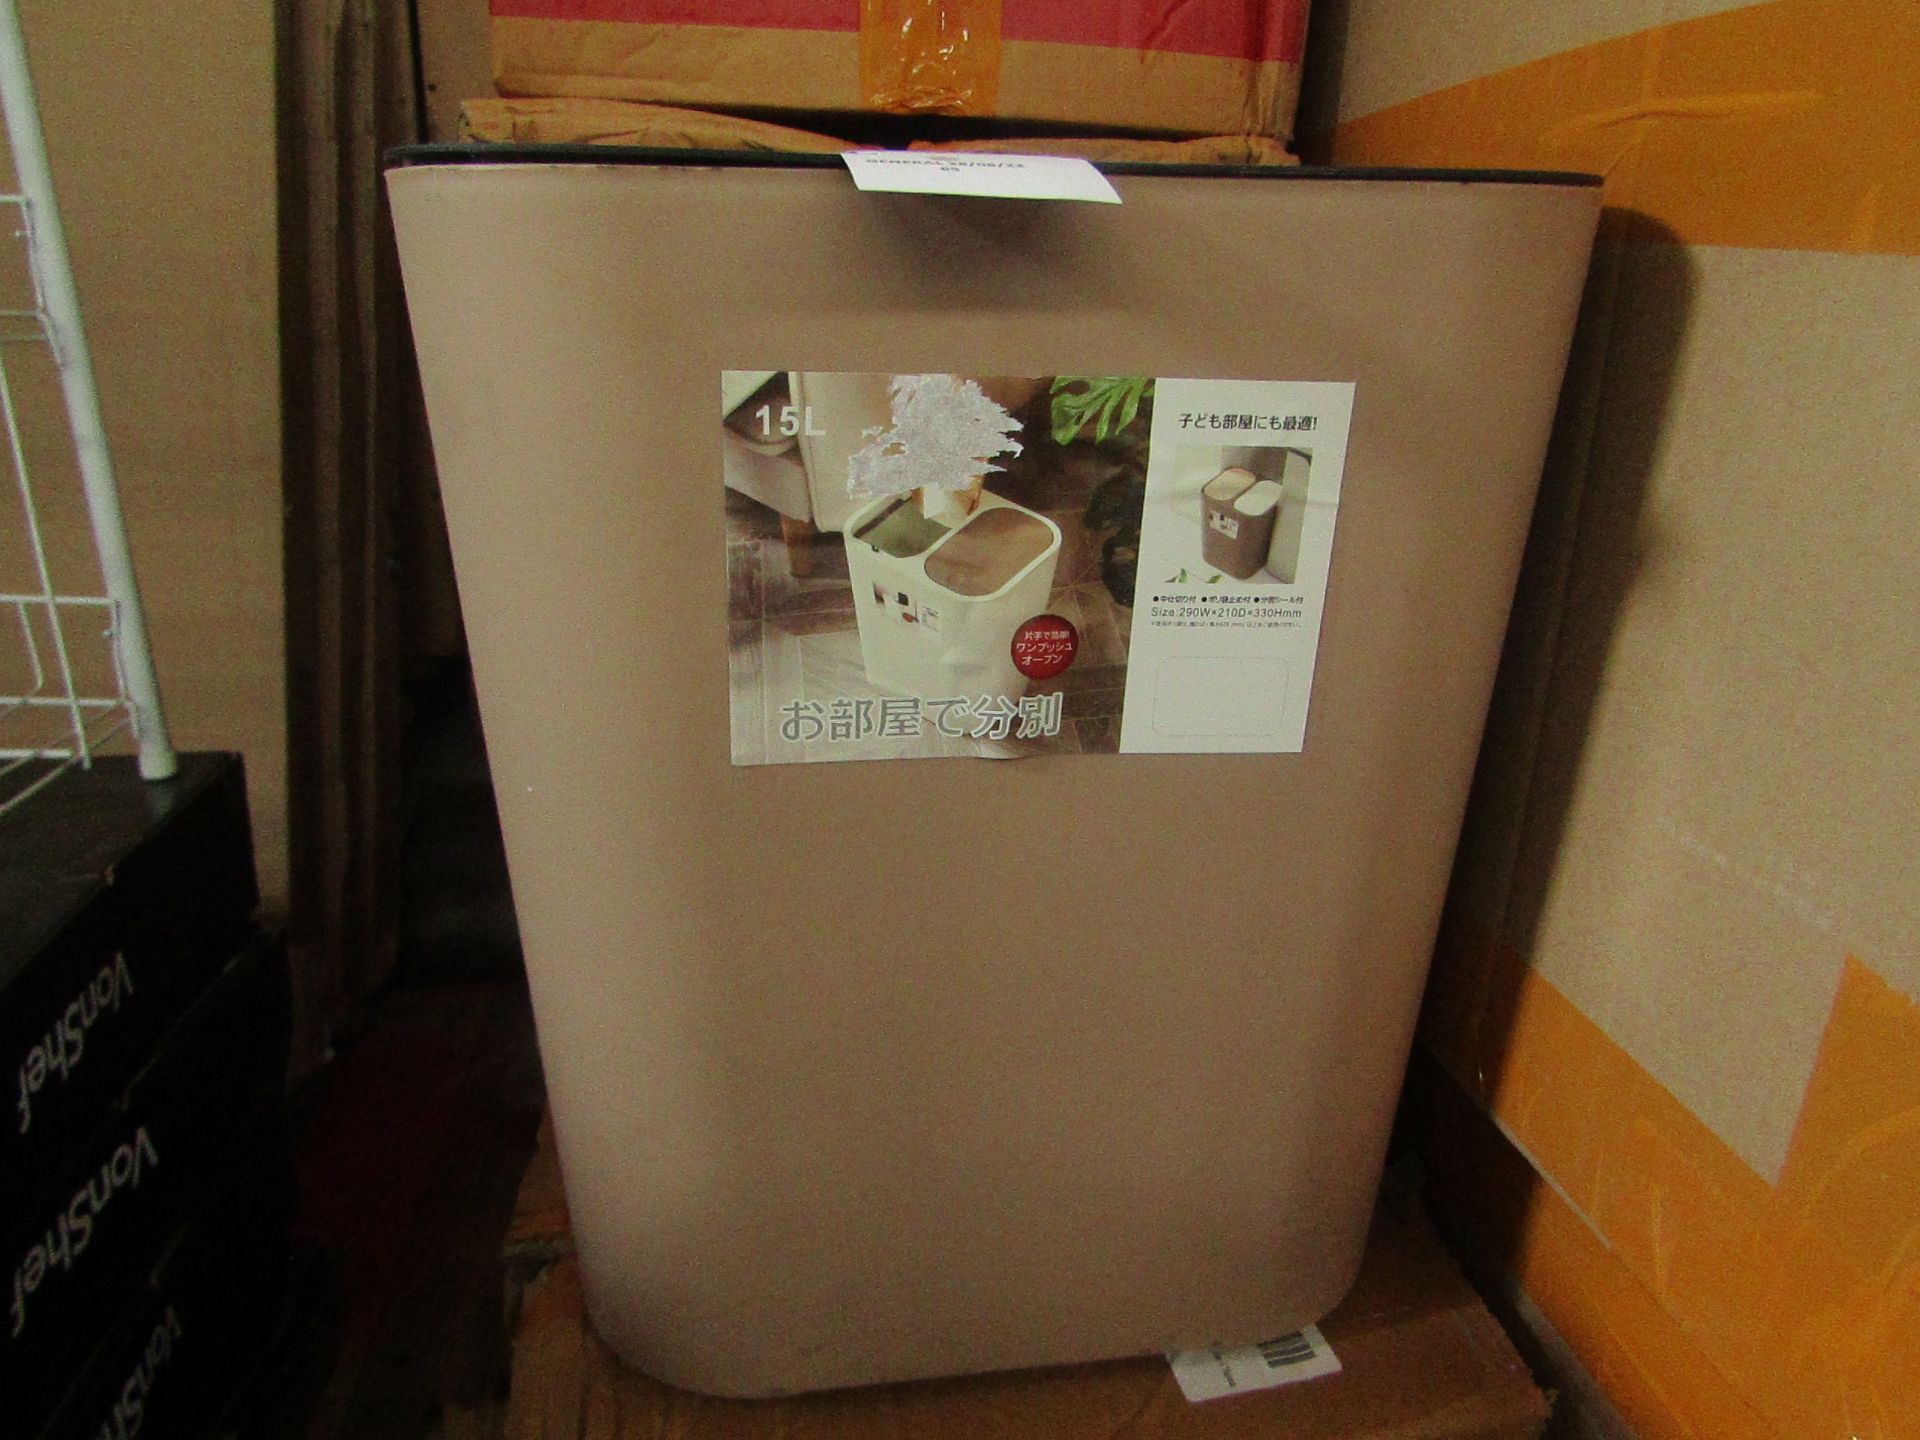 Unbranded - Small Dusty Pink 15L Double Recycle Bin - New & Boxed.